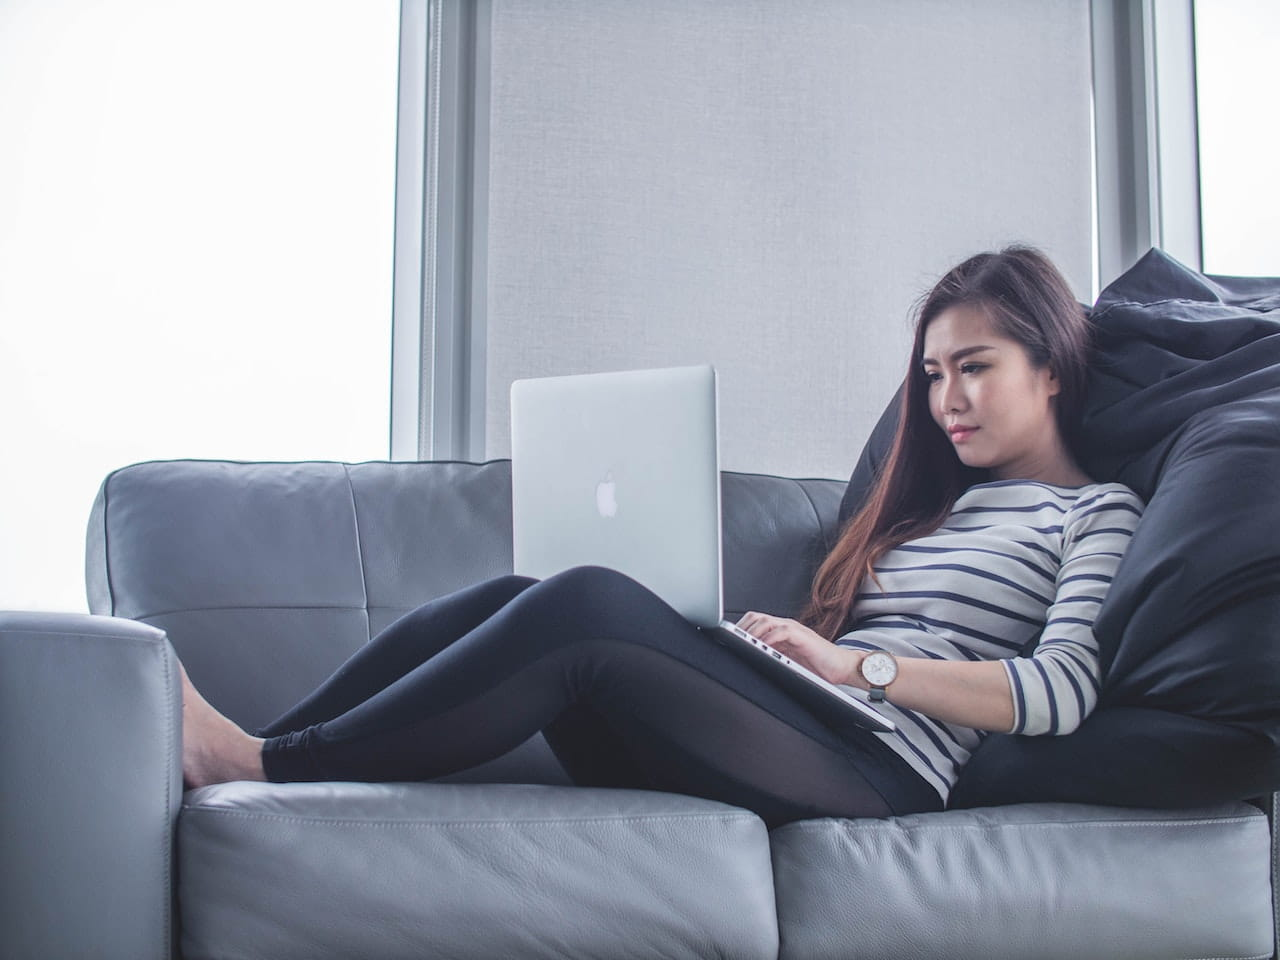 A young woman lays on a couch while working on her laptop.